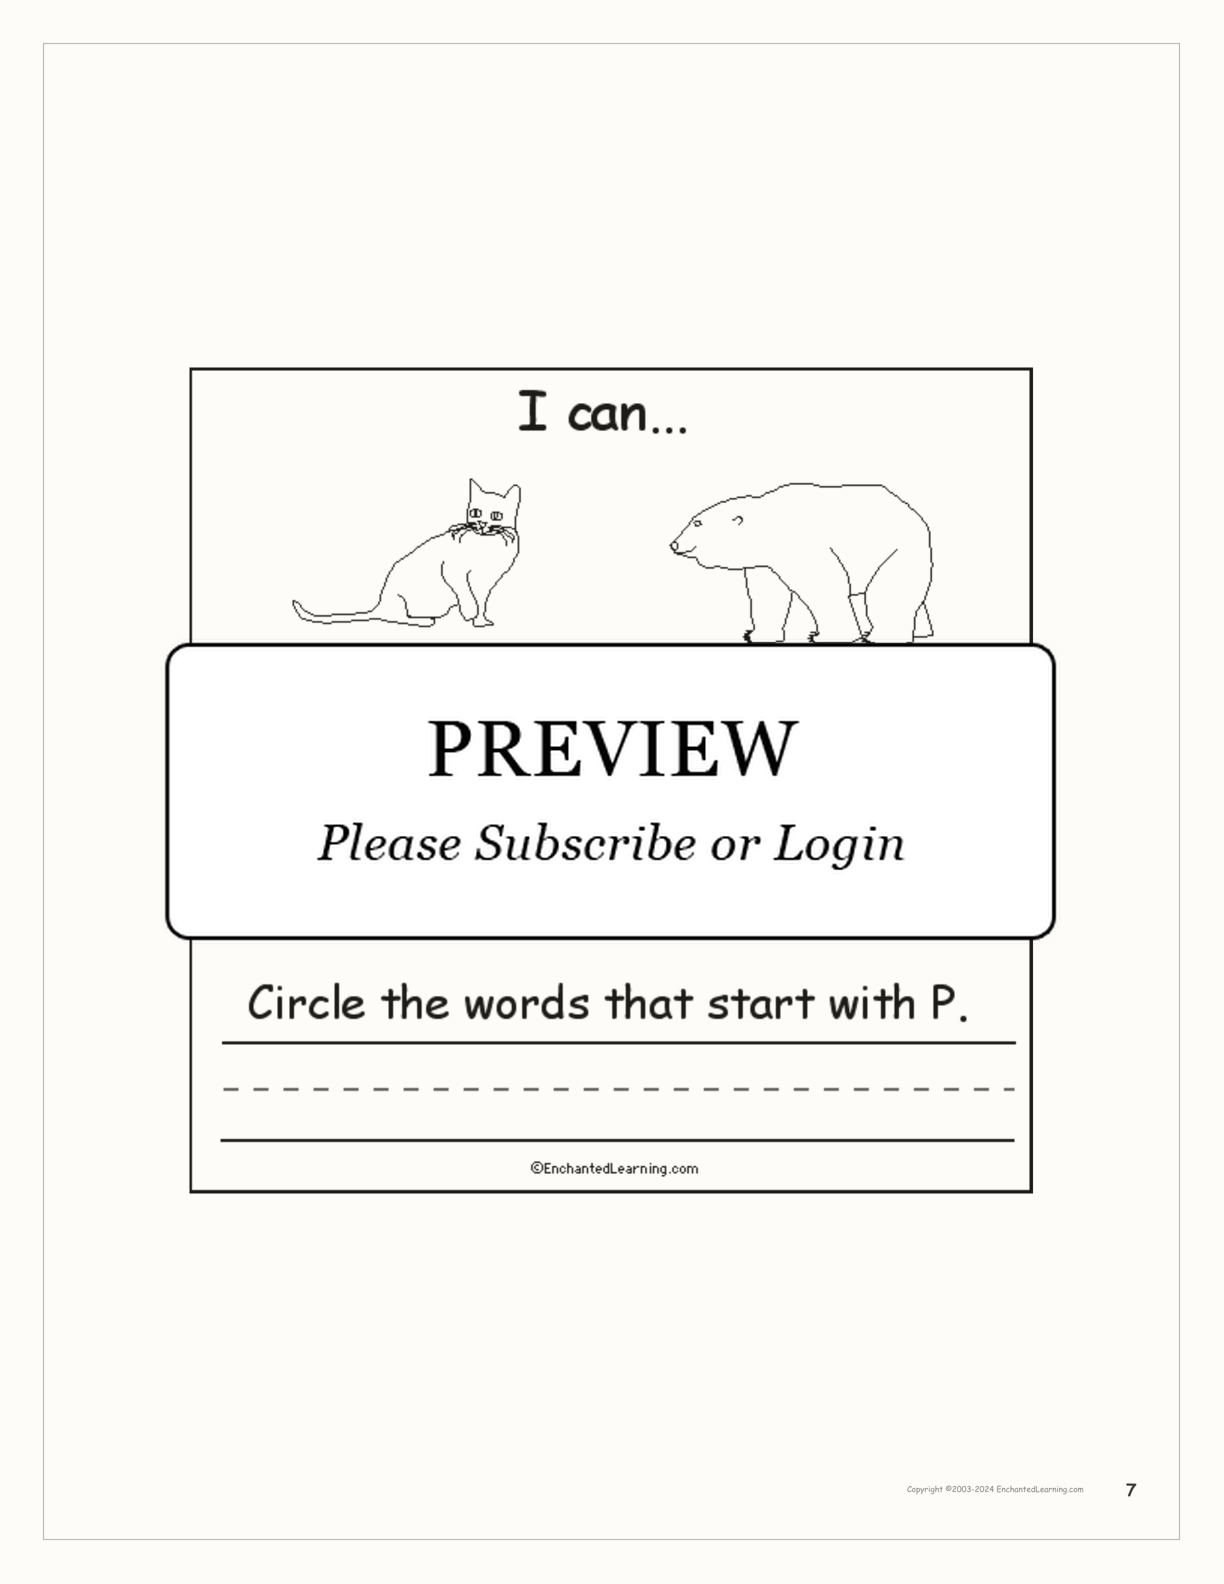 Winter I Can... Book interactive printout page 7